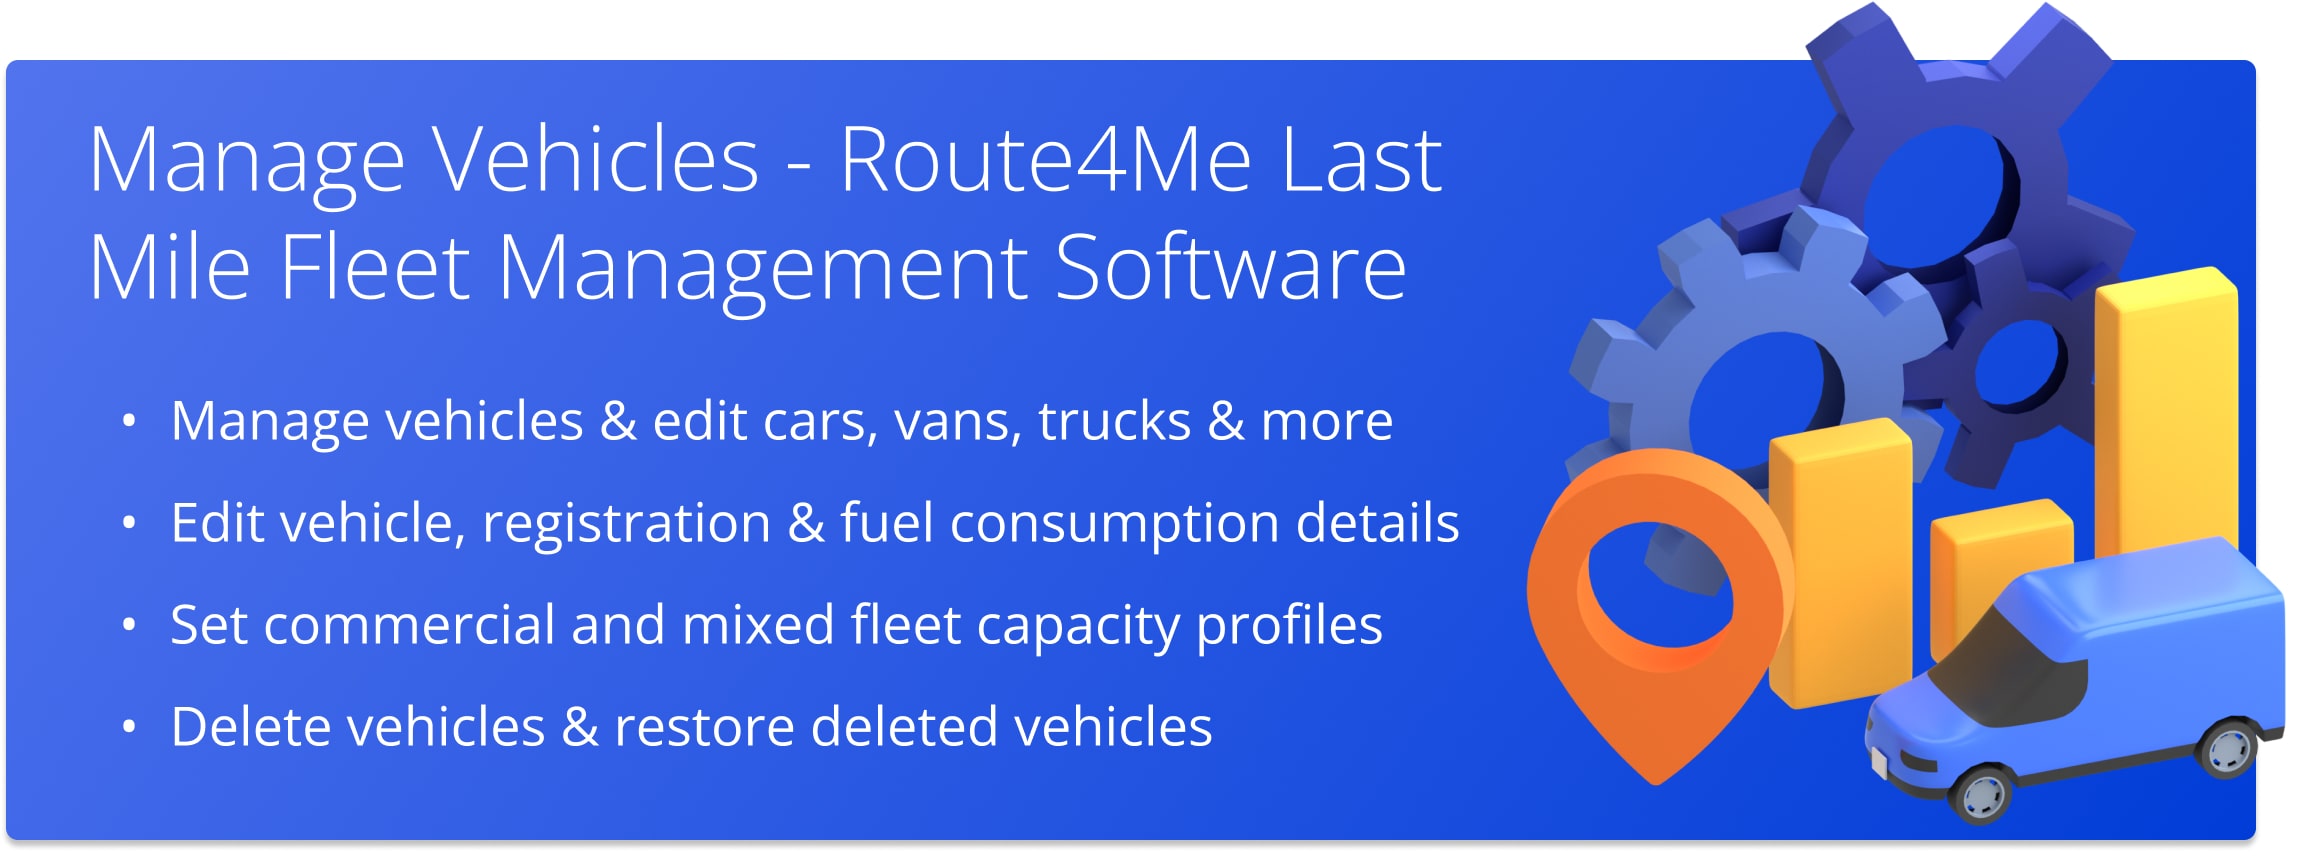 Manage vehicles, view vehicle details, edit, delete, and restore deleted vehicles, set commercial vehicle profiles and mixed capacity vehicle profiles.